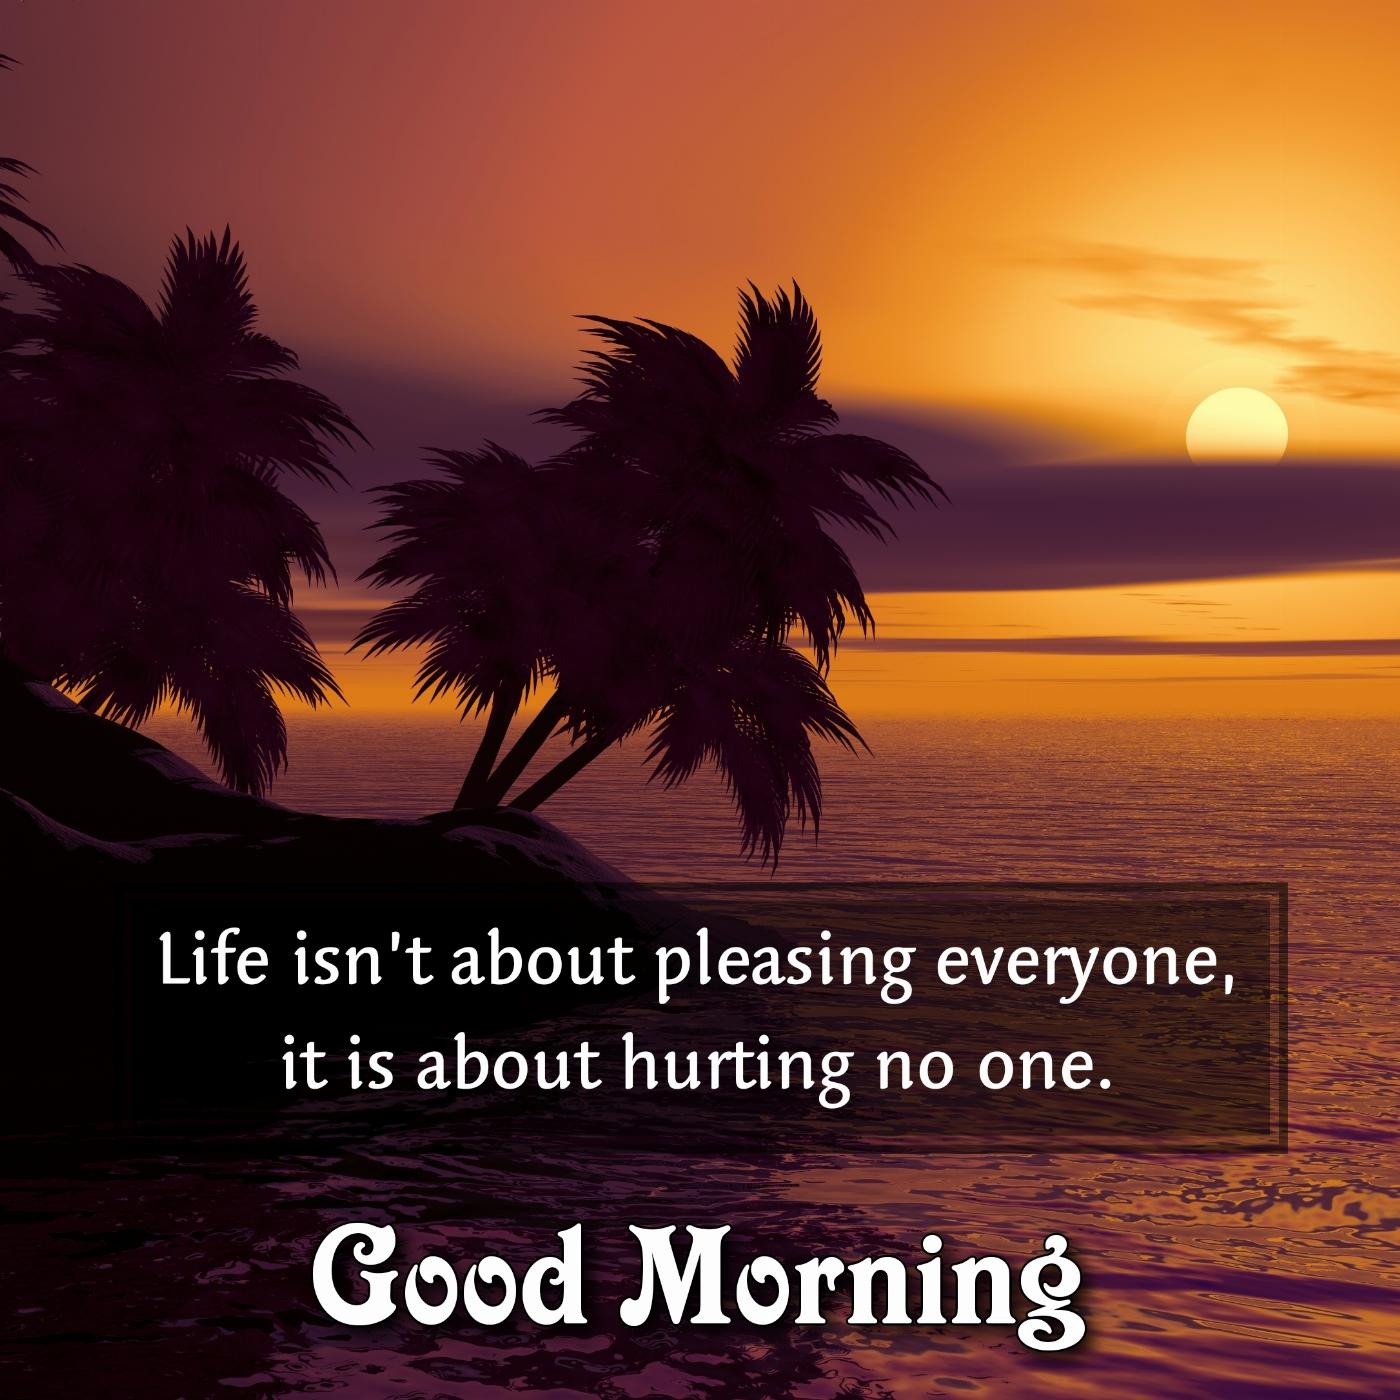 Life isnt about pleasing everyone